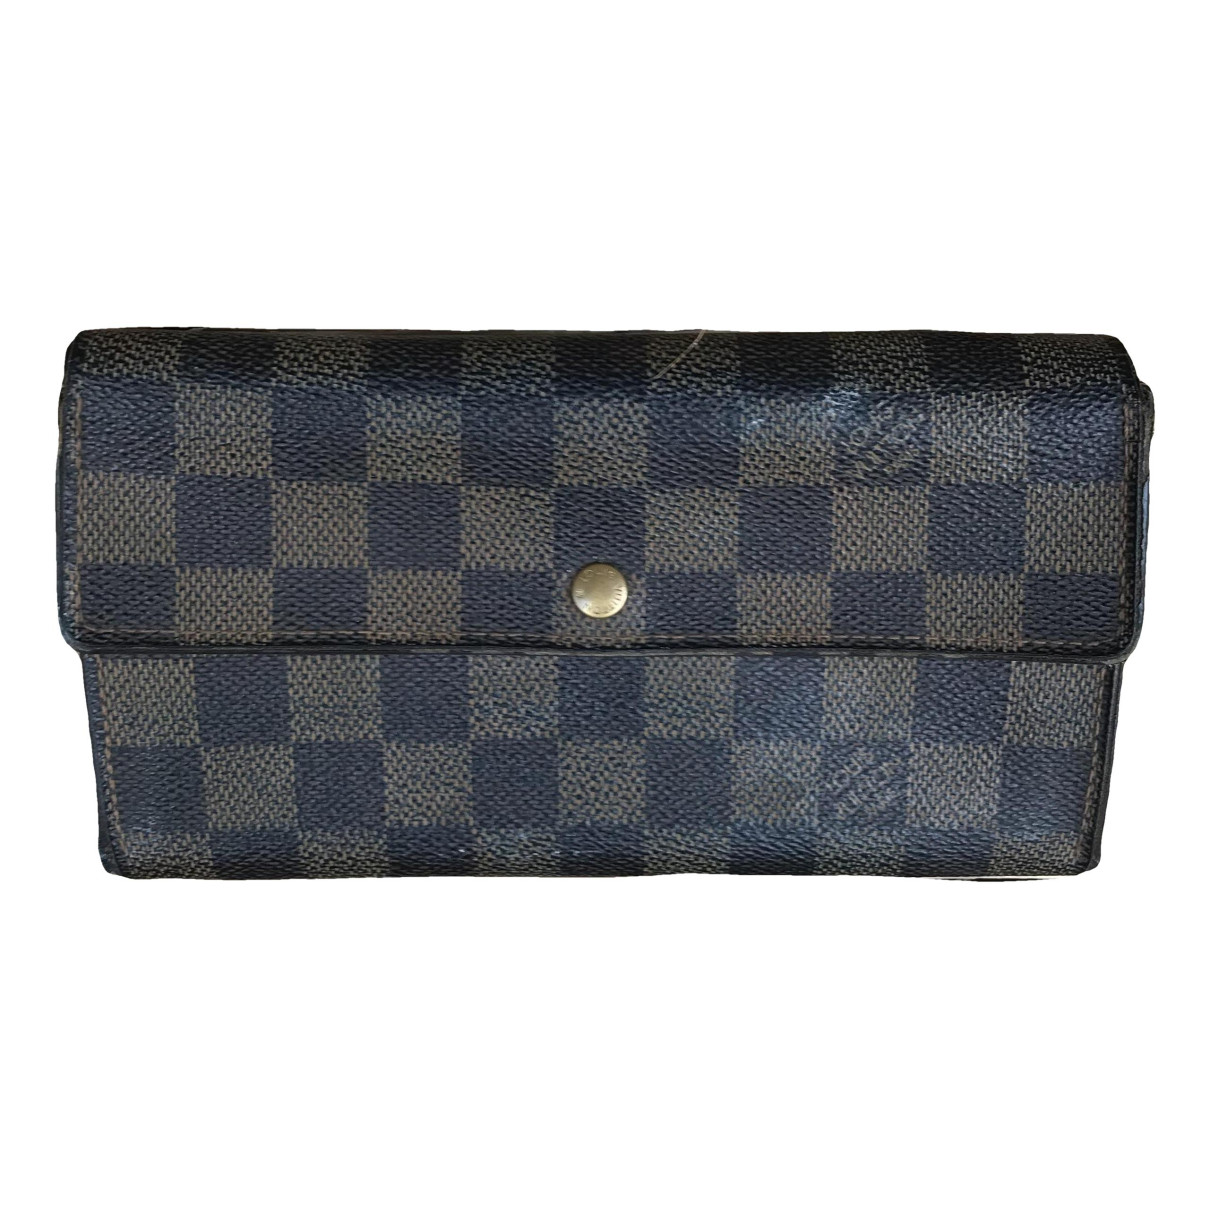 accessories Louis Vuitton wallets Alexandra for Female Other. Used condition